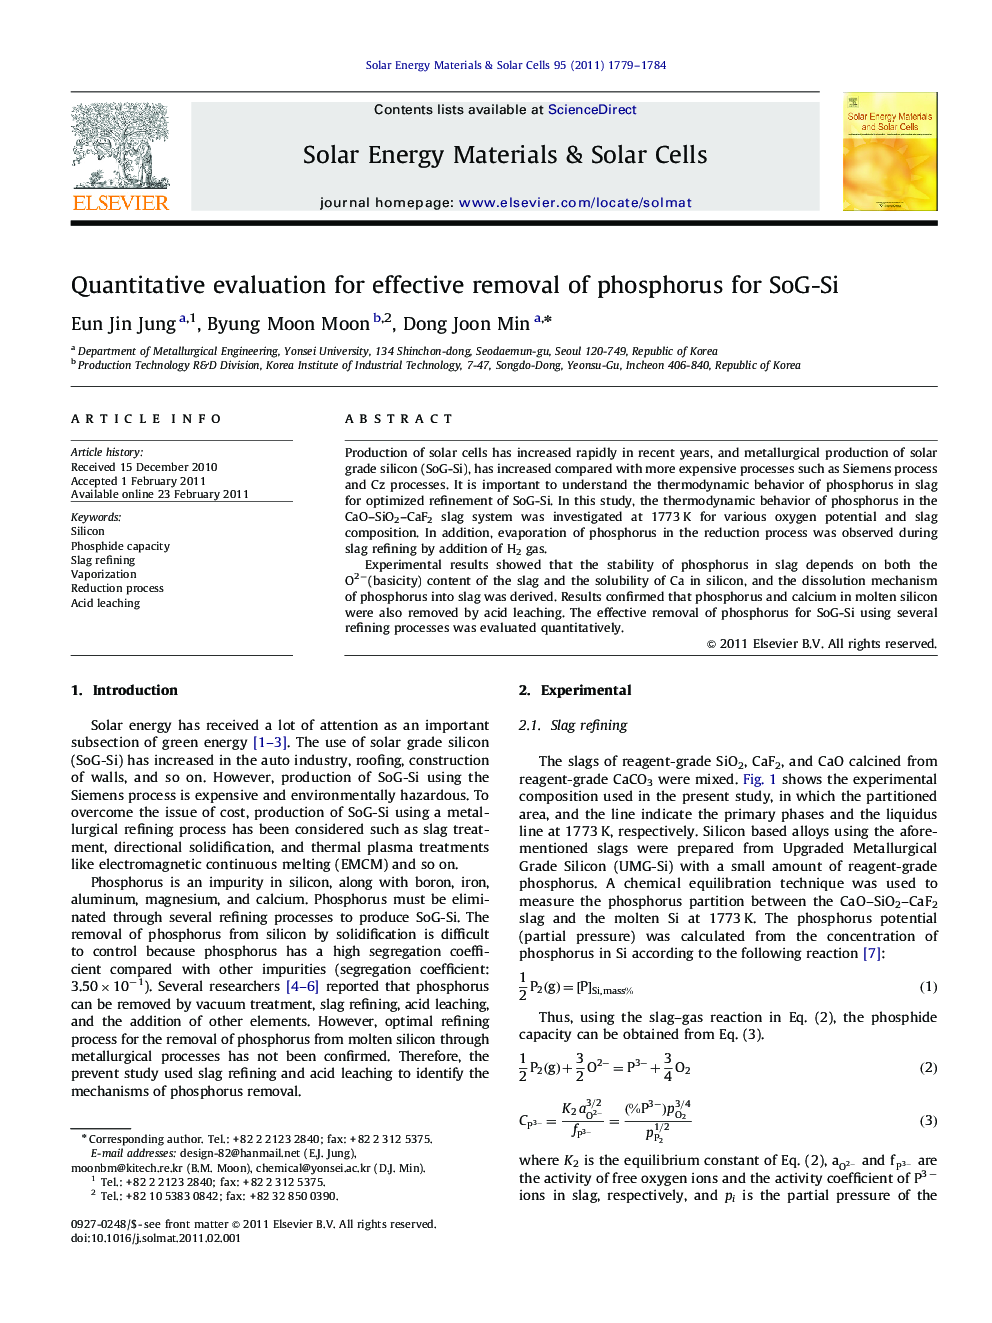 Quantitative evaluation for effective removal of phosphorus for SoG-Si